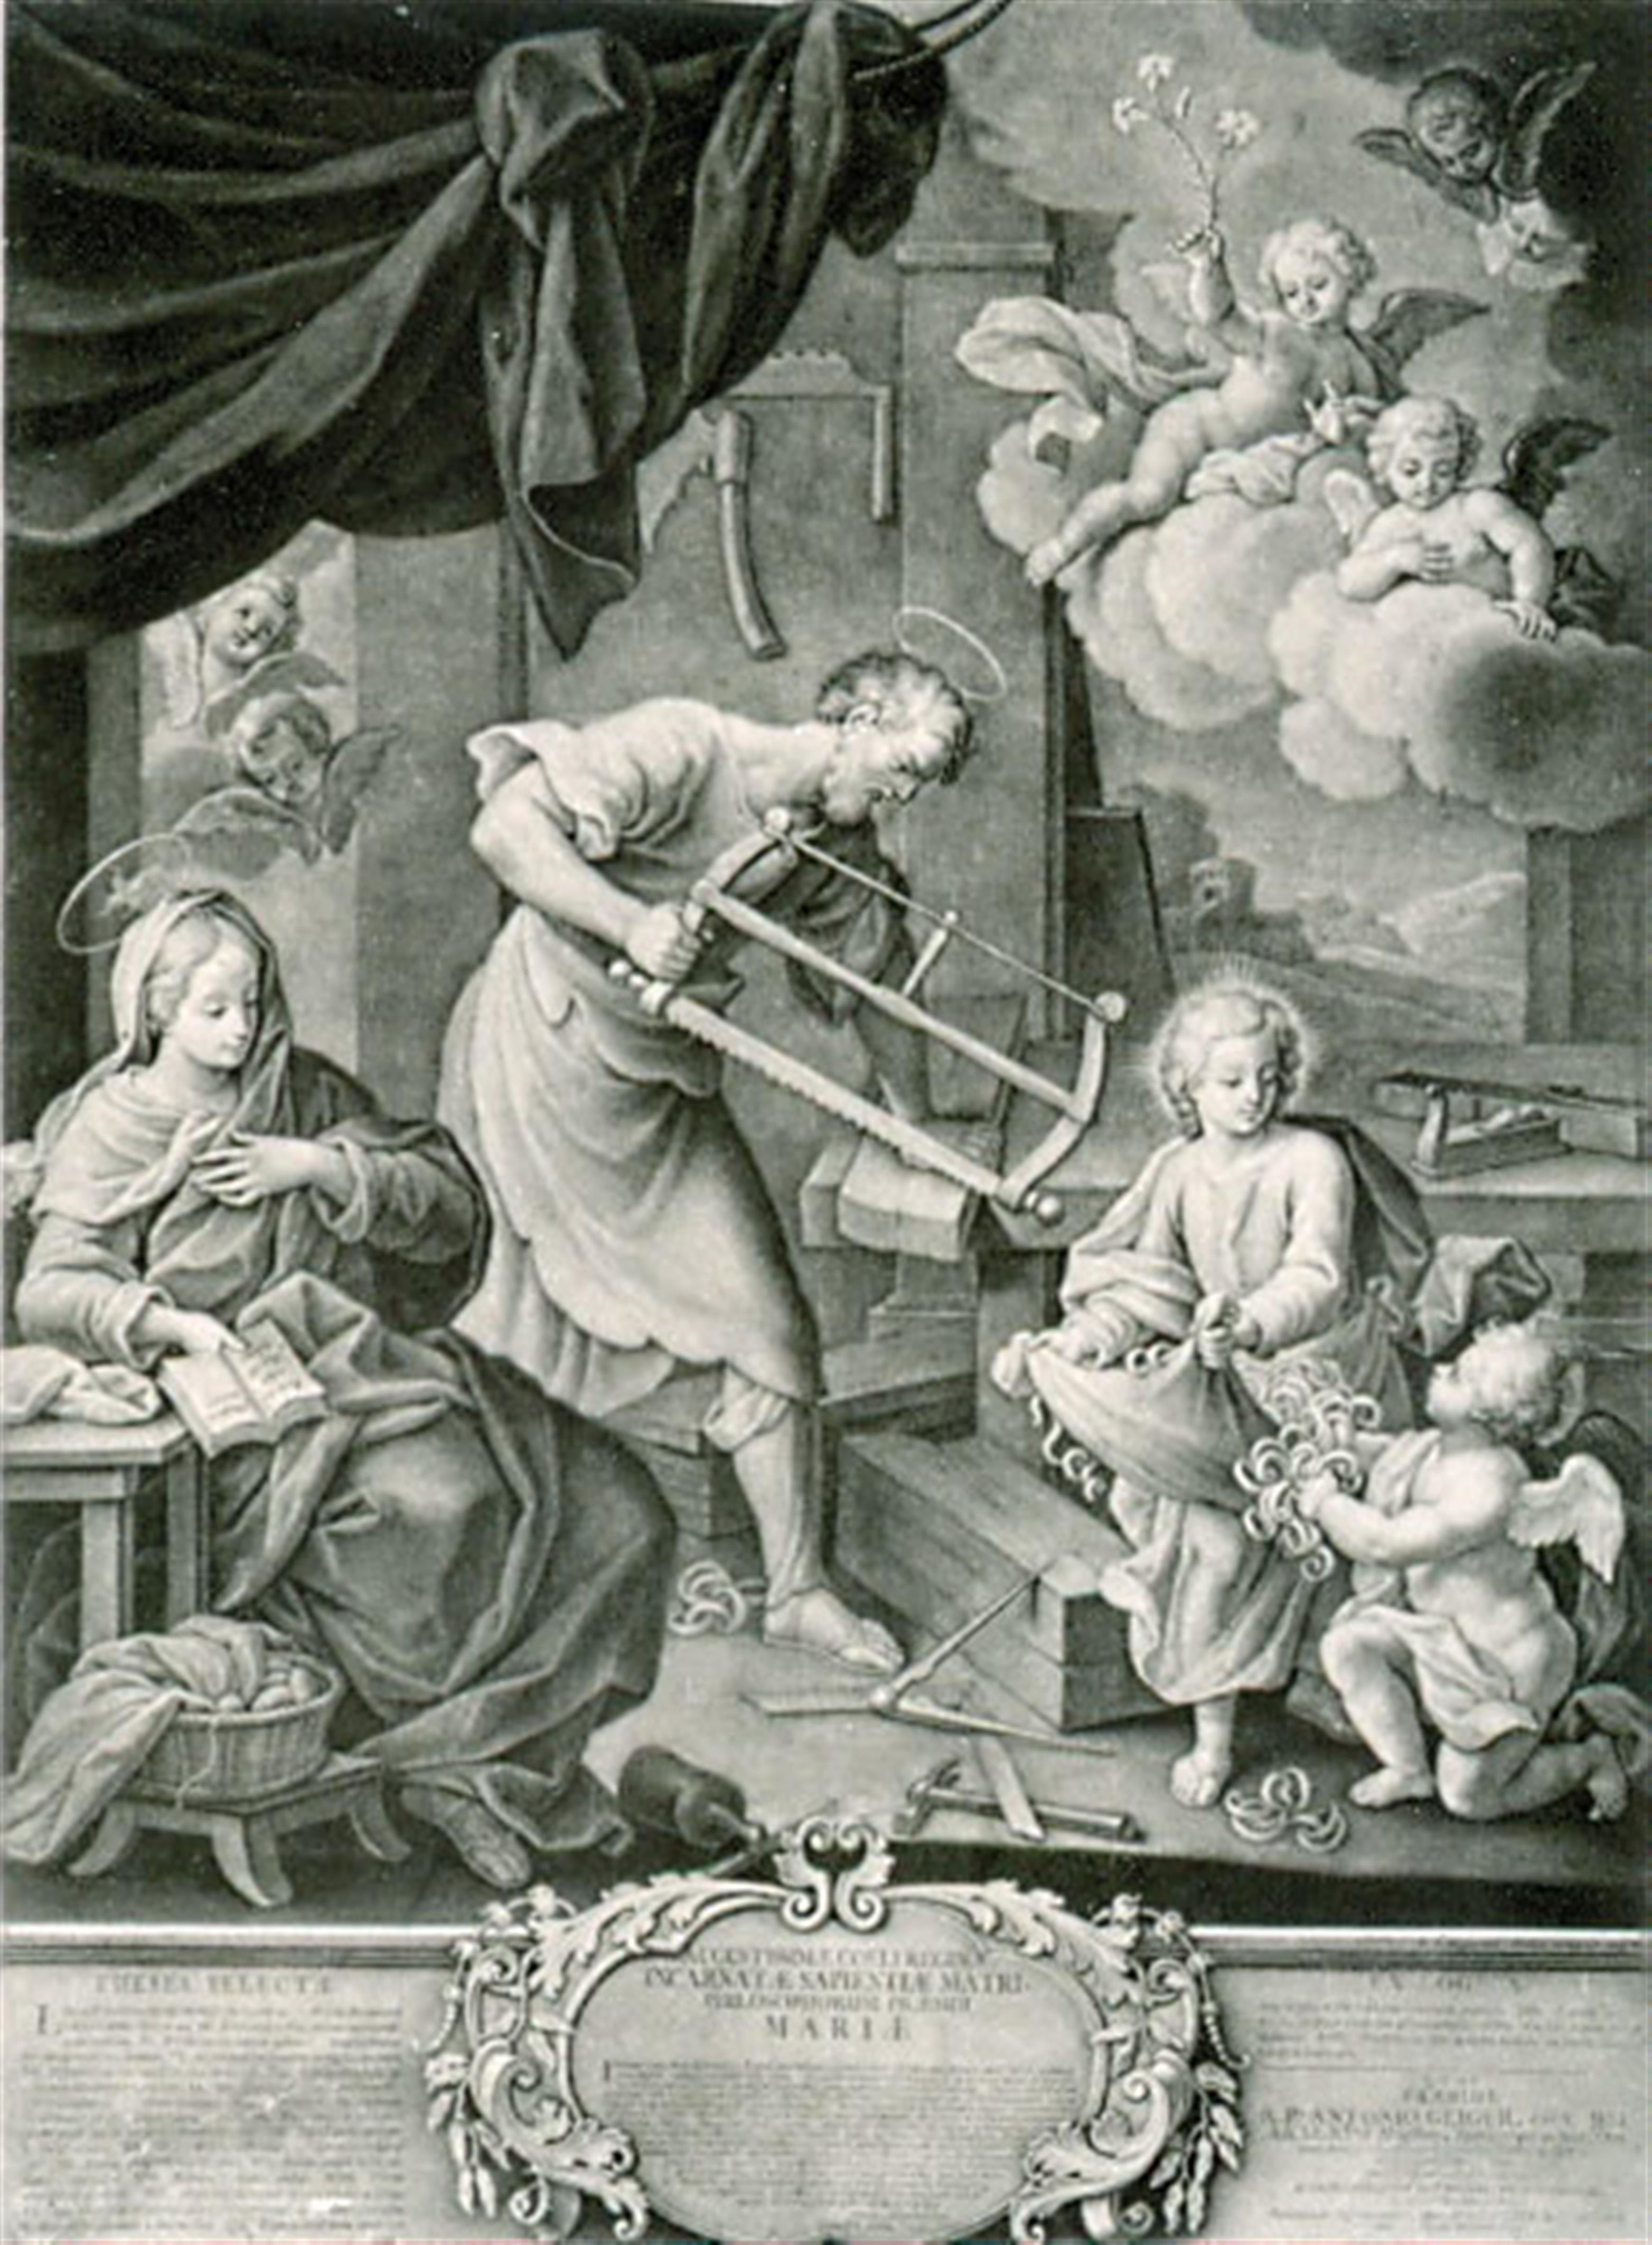 The Holy Family in Joseph's workshop
Northern Bohemia, mid-19th C. - image-2